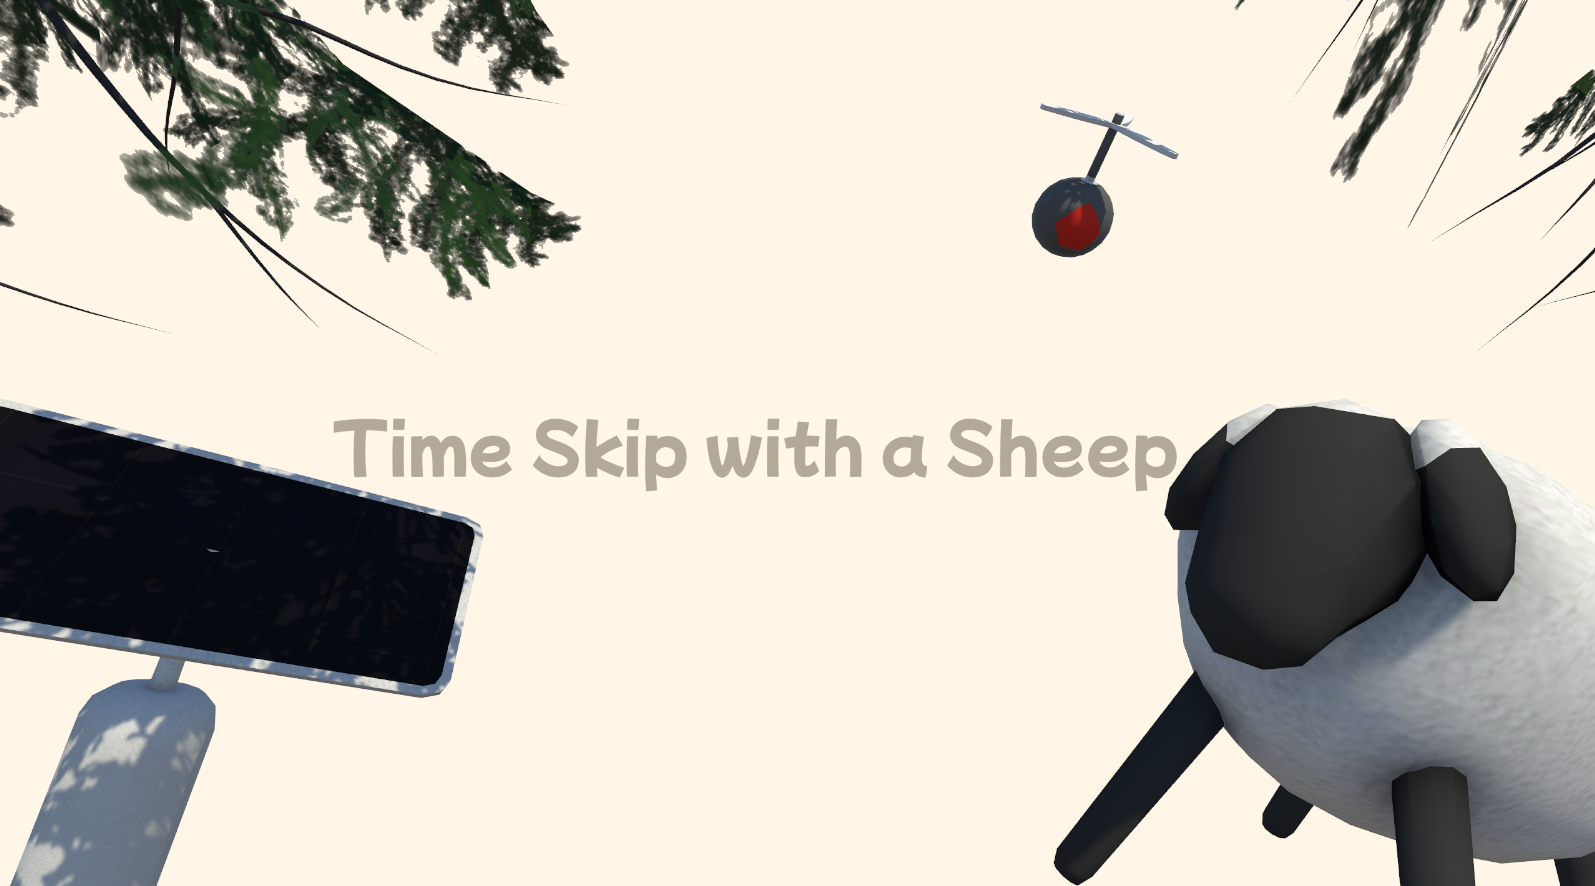 Time Skip with a Sheep